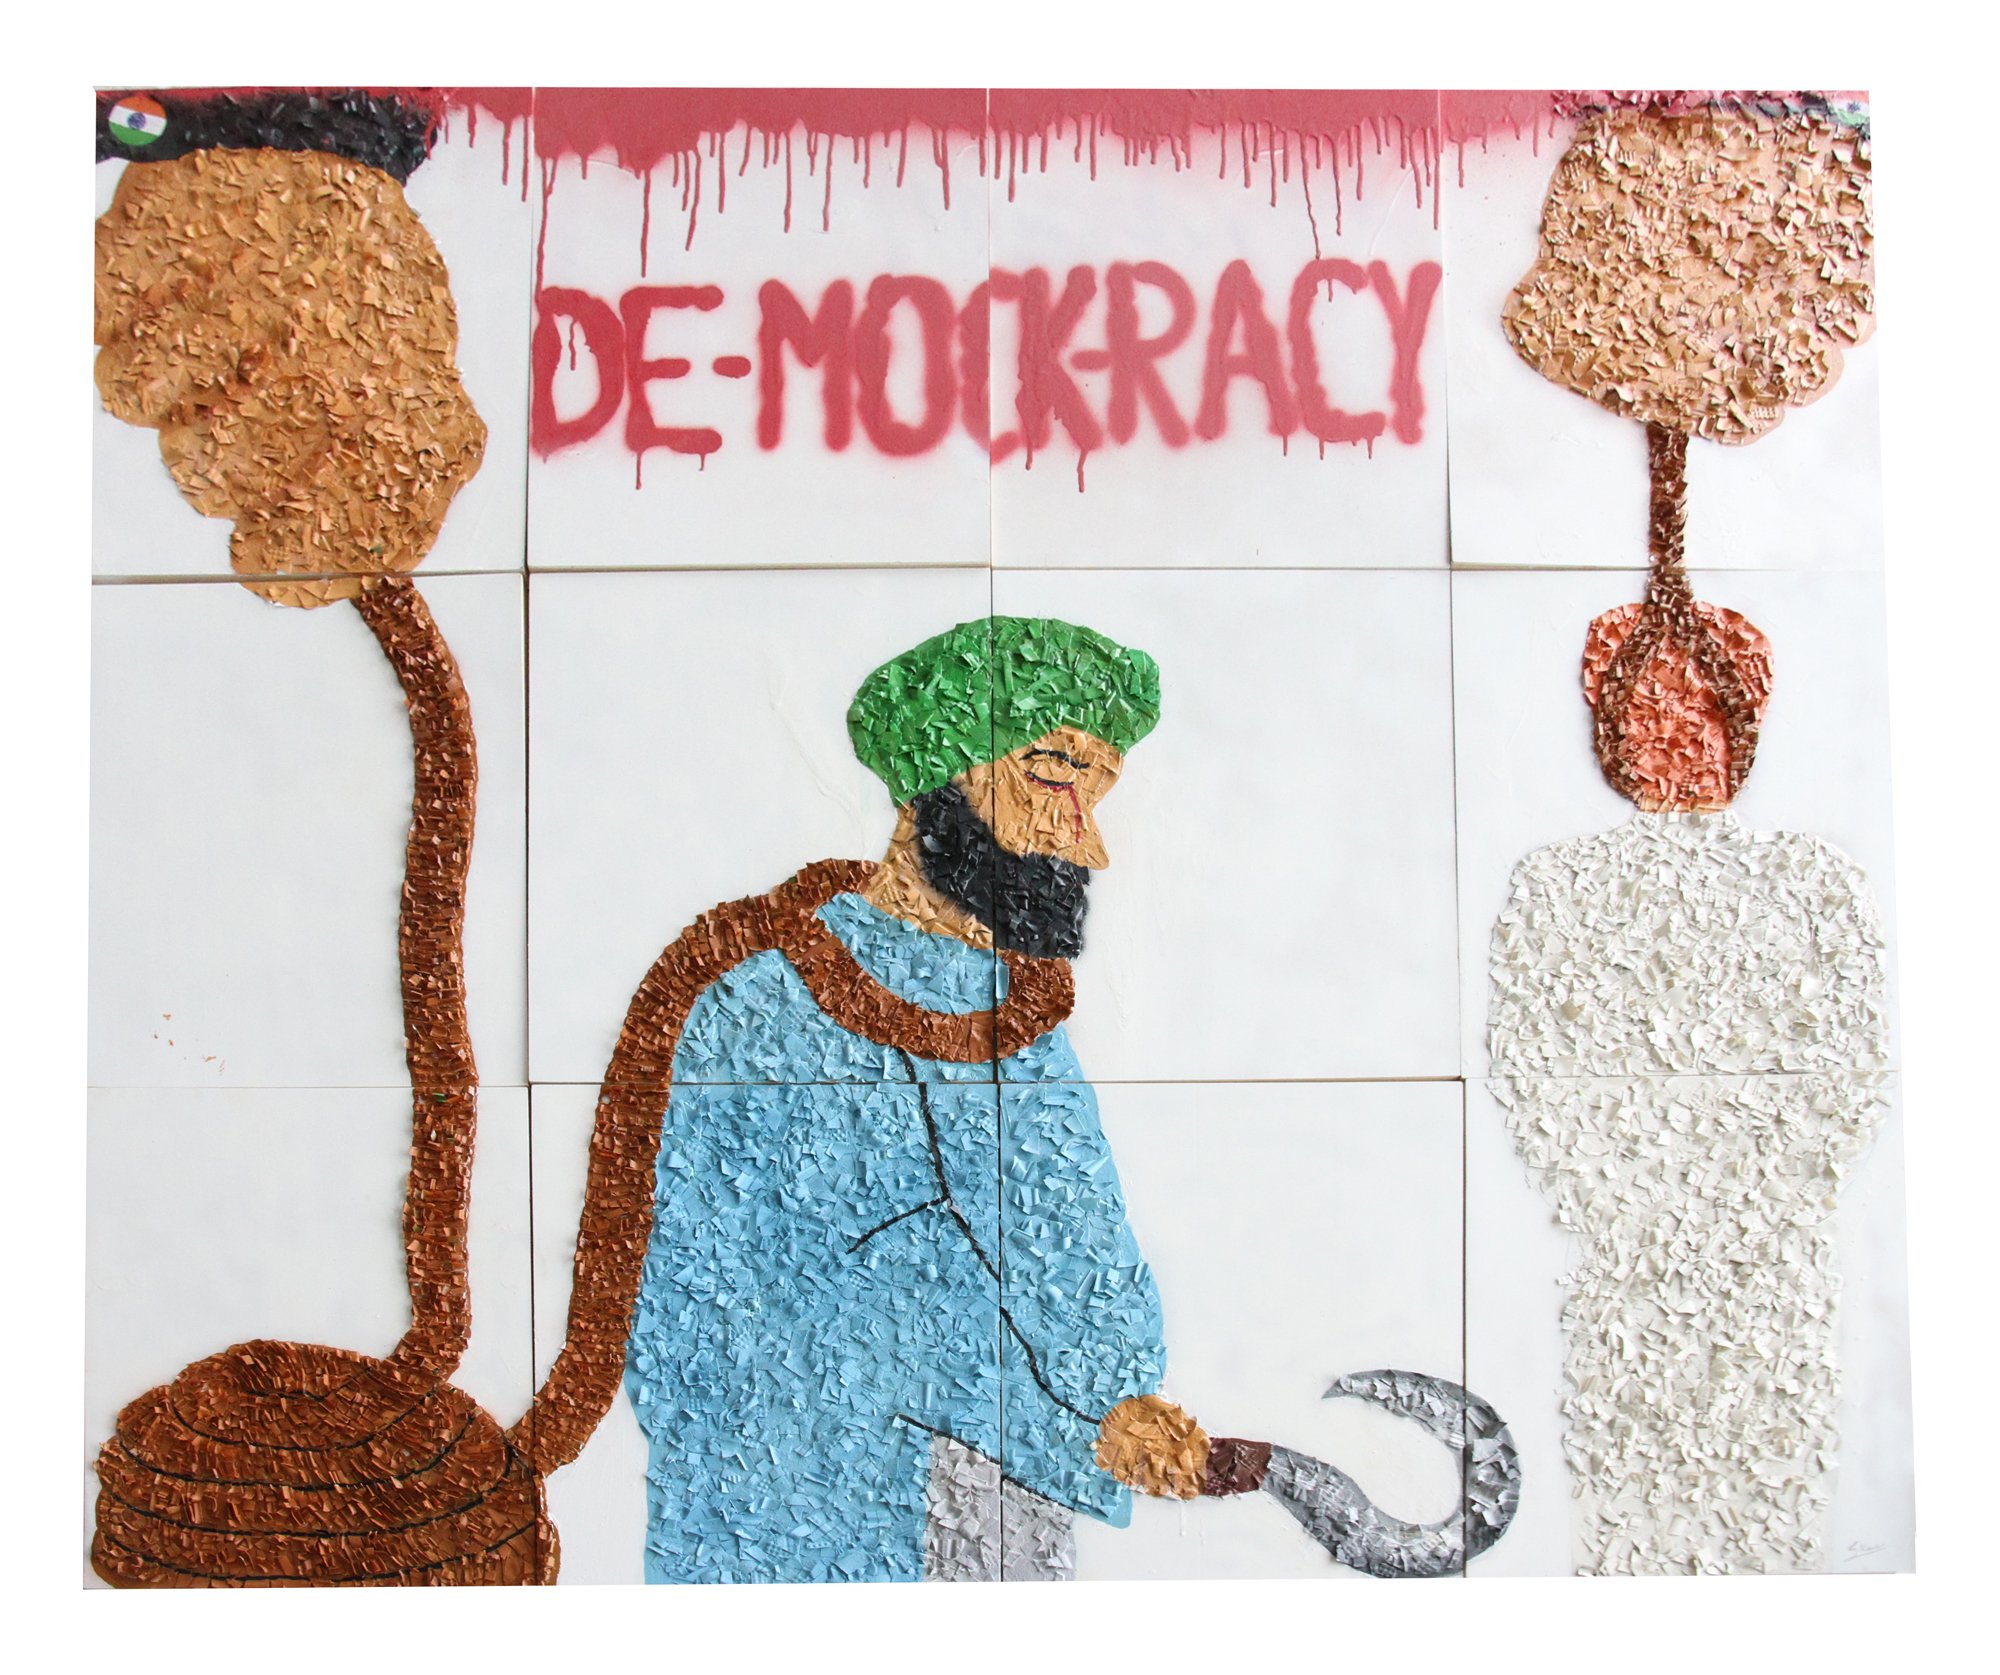 Image of a set of 12 panels which makes up one painting, an Indian farmer is on his knees with a sickle in his hand, he has a rope around his neck, held by a large hand. The words Demockracy are written above the figure. A small Indian flag is placed in the top left corner.